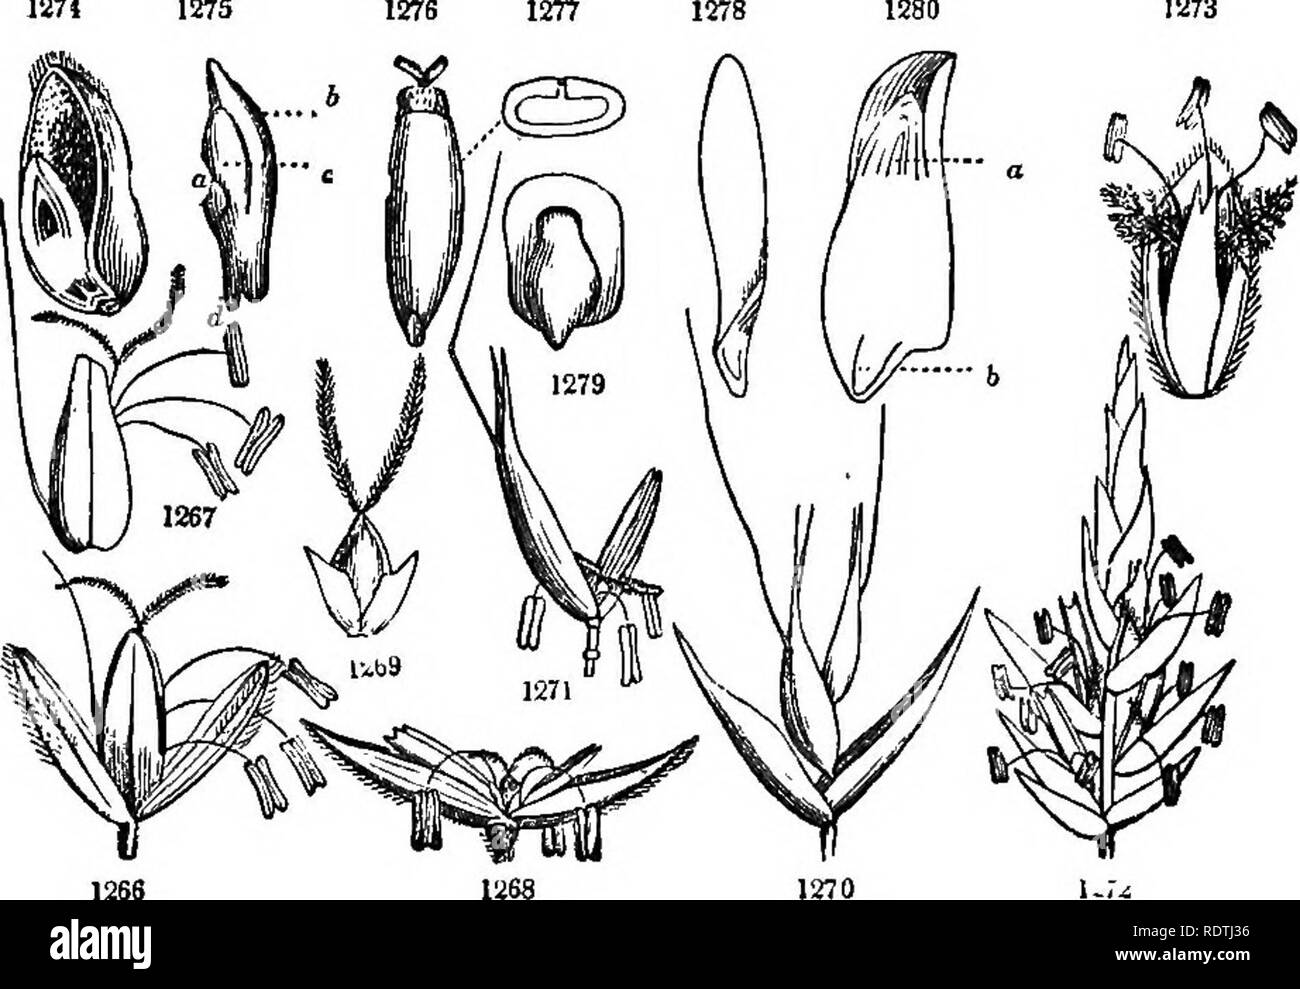 Introduction To Structural And Systematic Botany And Vegetable Physiology Botany 498 Illustrations Of The Natural Orders Hilum Fig 126 128 622 624 X Agrostis Phleum Poa Festuca Which Are The Principal Meadow And